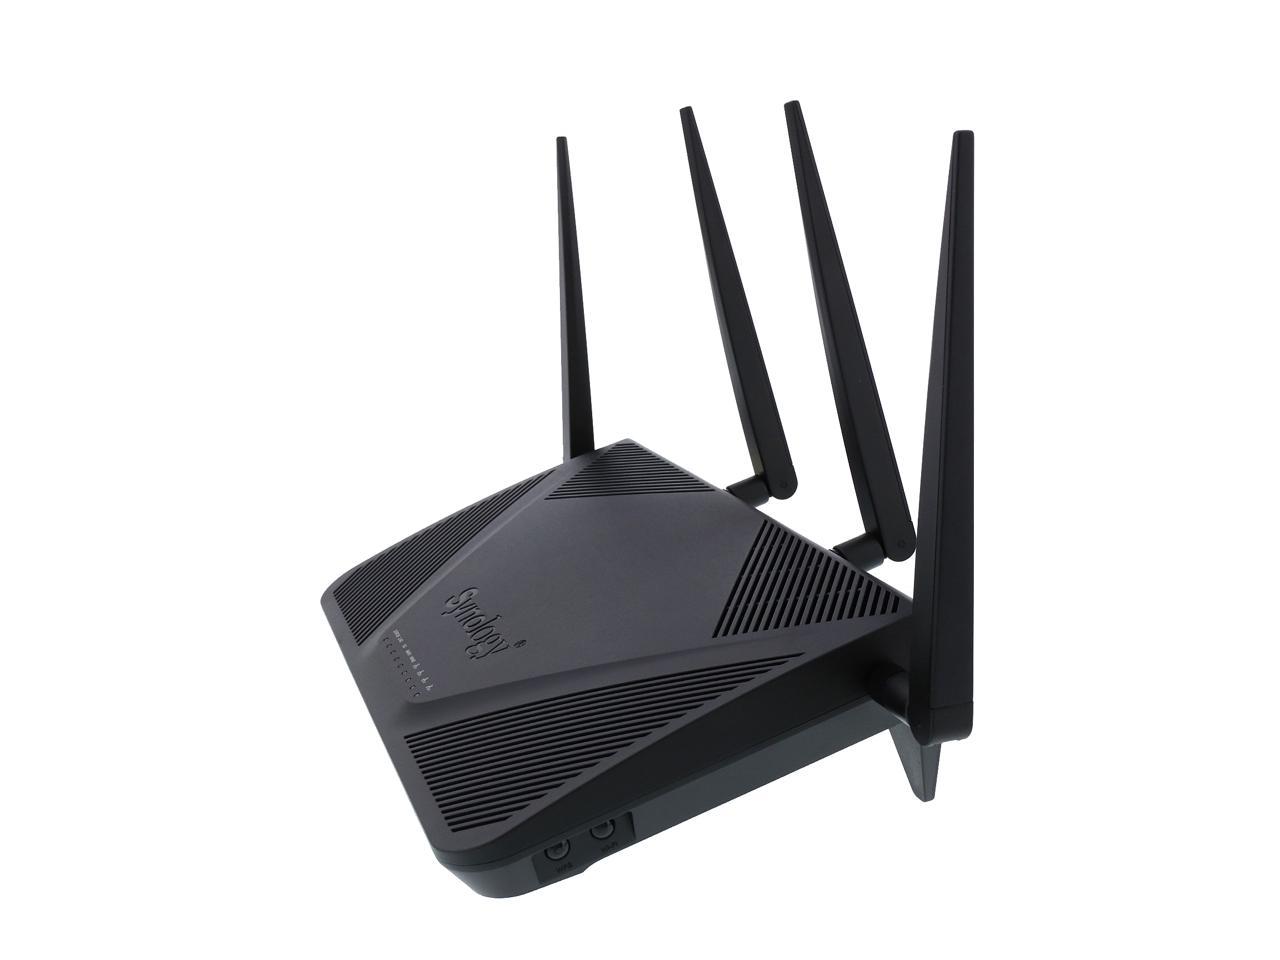 PC/タブレット PC周辺機器 Synology RT2600ac Wi-Fi AC 2600 Gigabit Router - Newegg.com